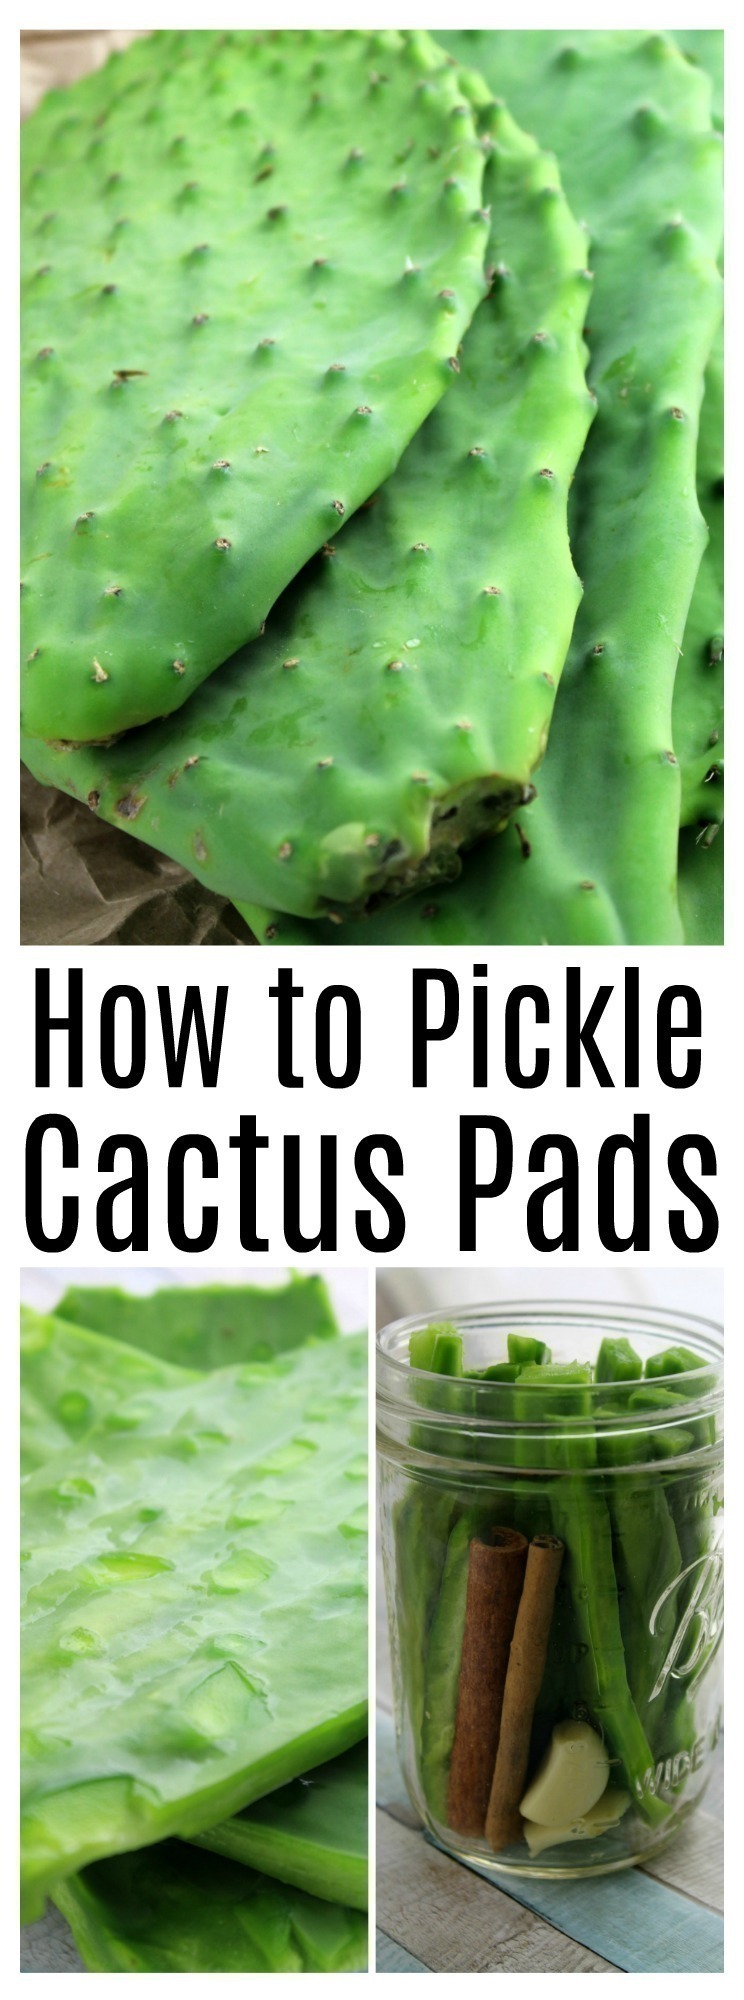 Cactus pads (Nopales) are trimmed, cleaned, and sliced, then pickled in a sweet brine that is full of flavor.